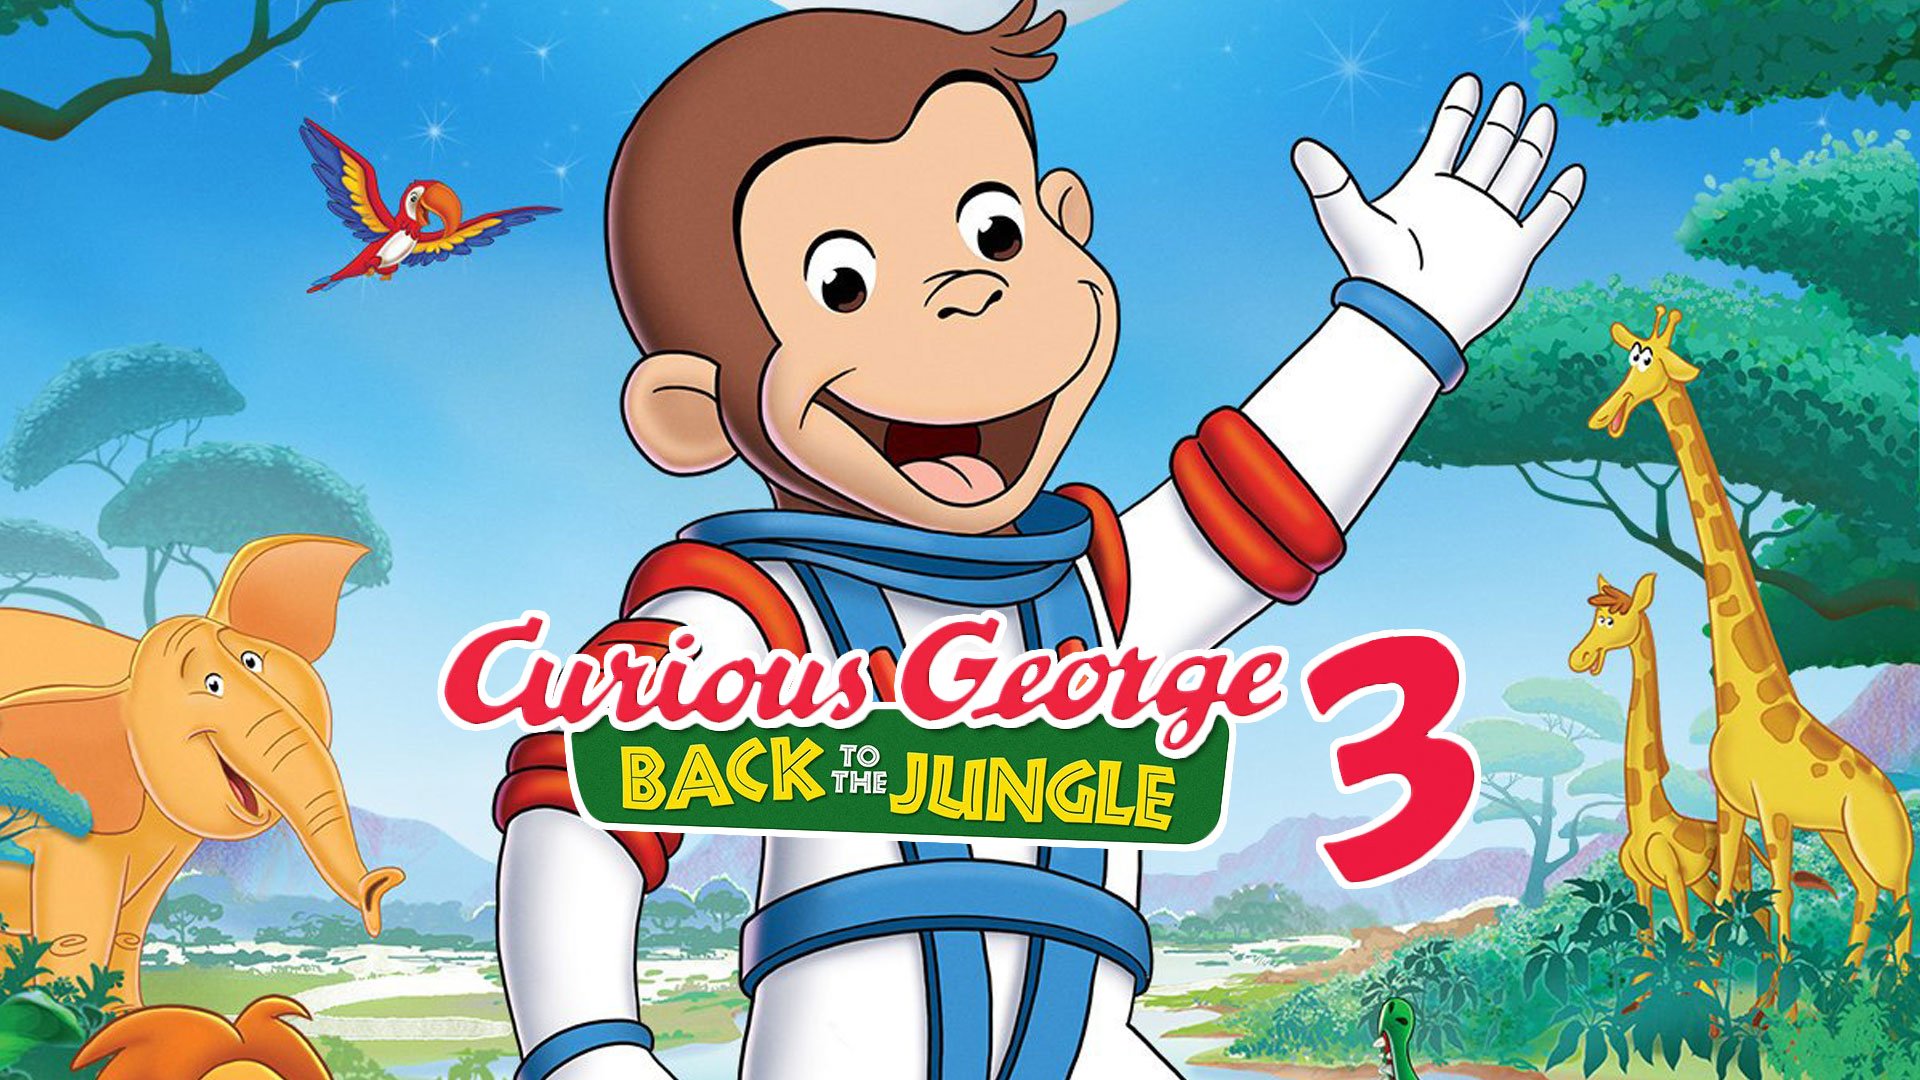 Curious George 3 Back To The Jungle Dvd Cover - HD Wallpaper 